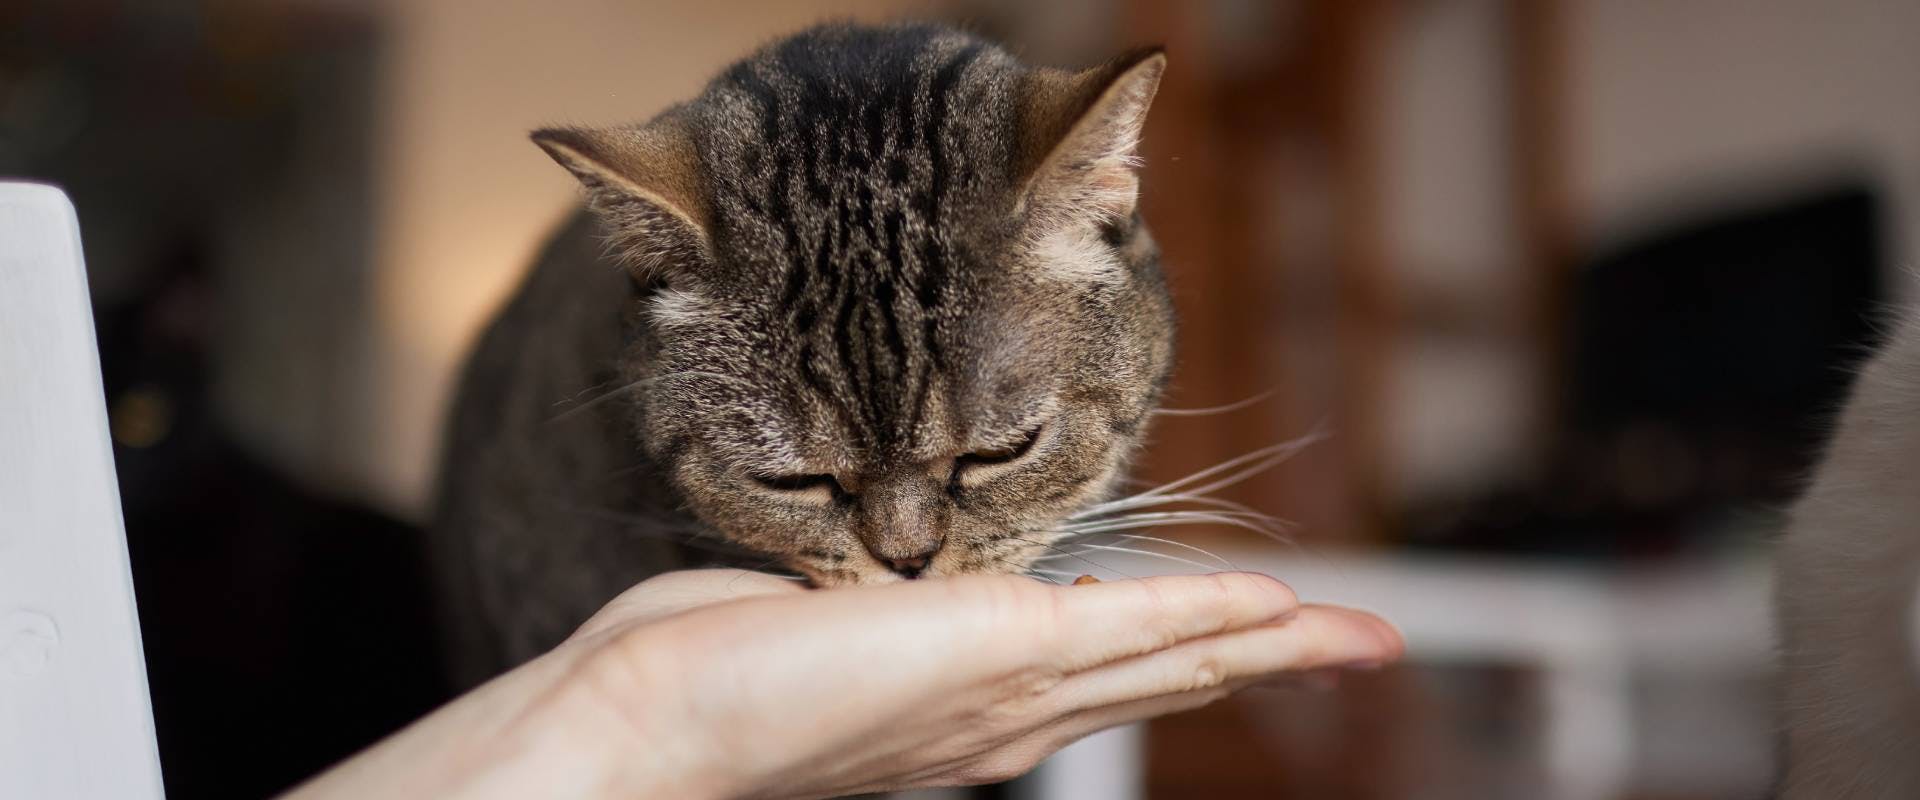 A cat eats out of someone's hands.